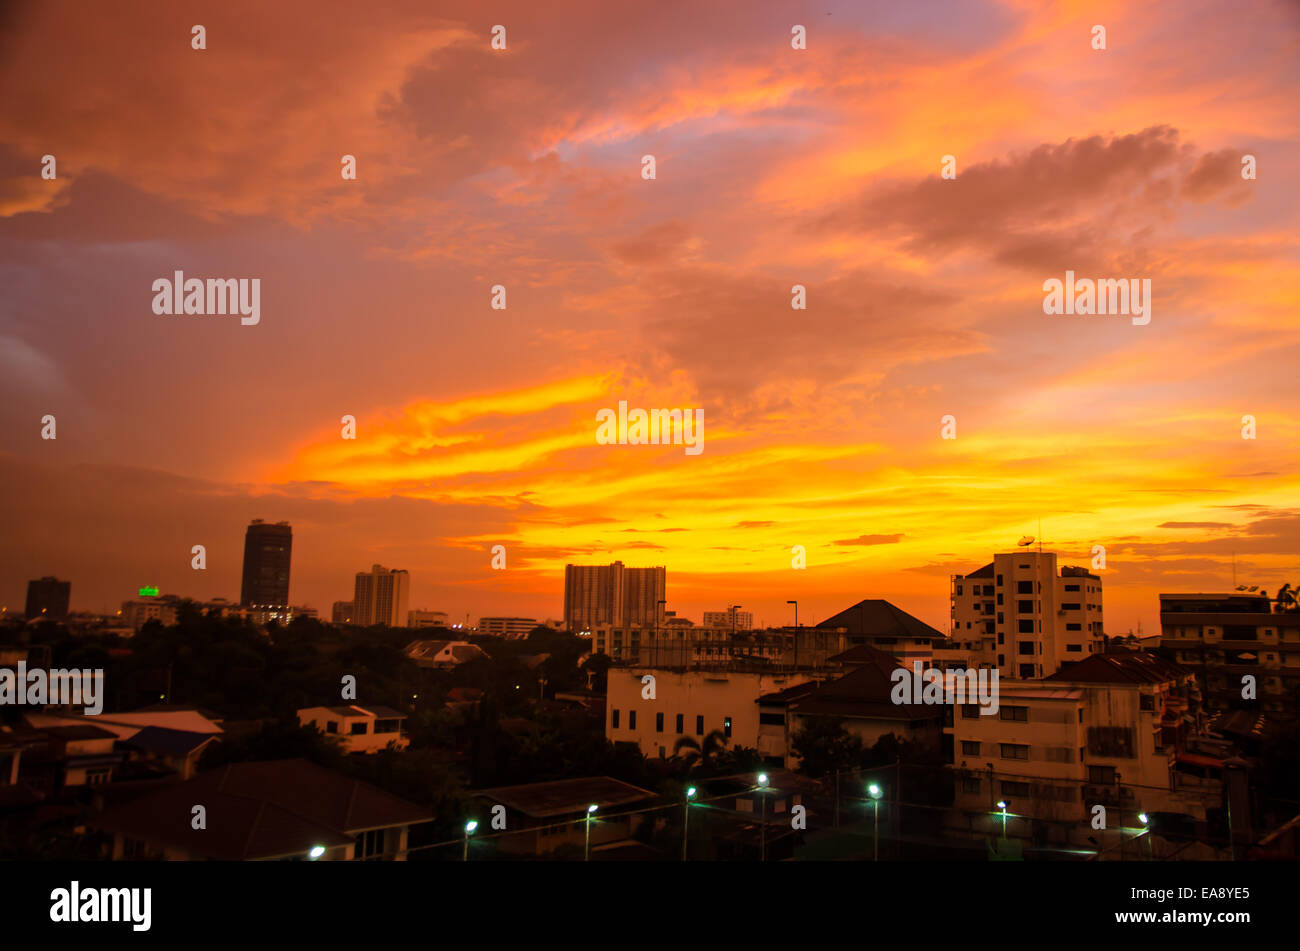 sundown with red sky in city Stock Photo